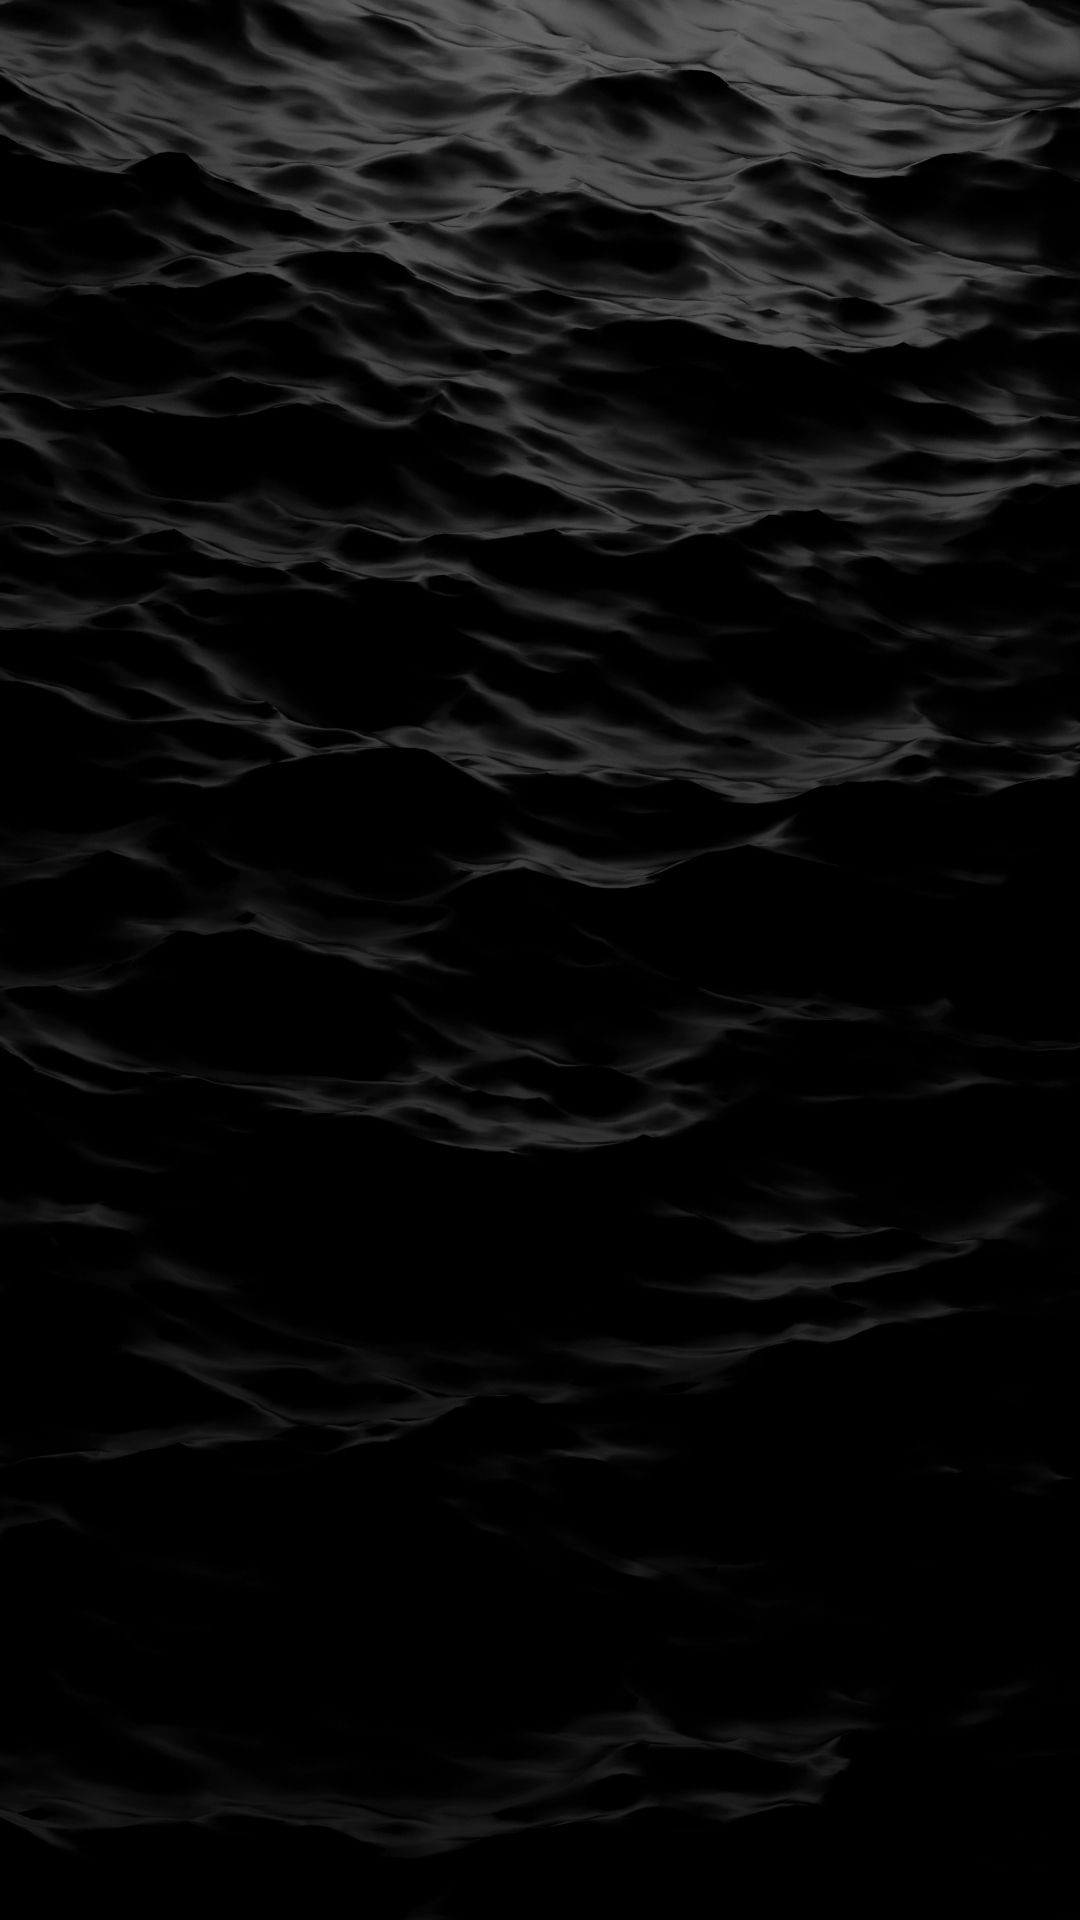 All Black iPhone Wallpaper HD with high-resolution 1080x1920 pixel. You can set as wallpaper for Apple iPhone X, XS Max, XR, 8, 7, 6, SE, iPad. Enjoy and share your favorite HD wallpapers and background images